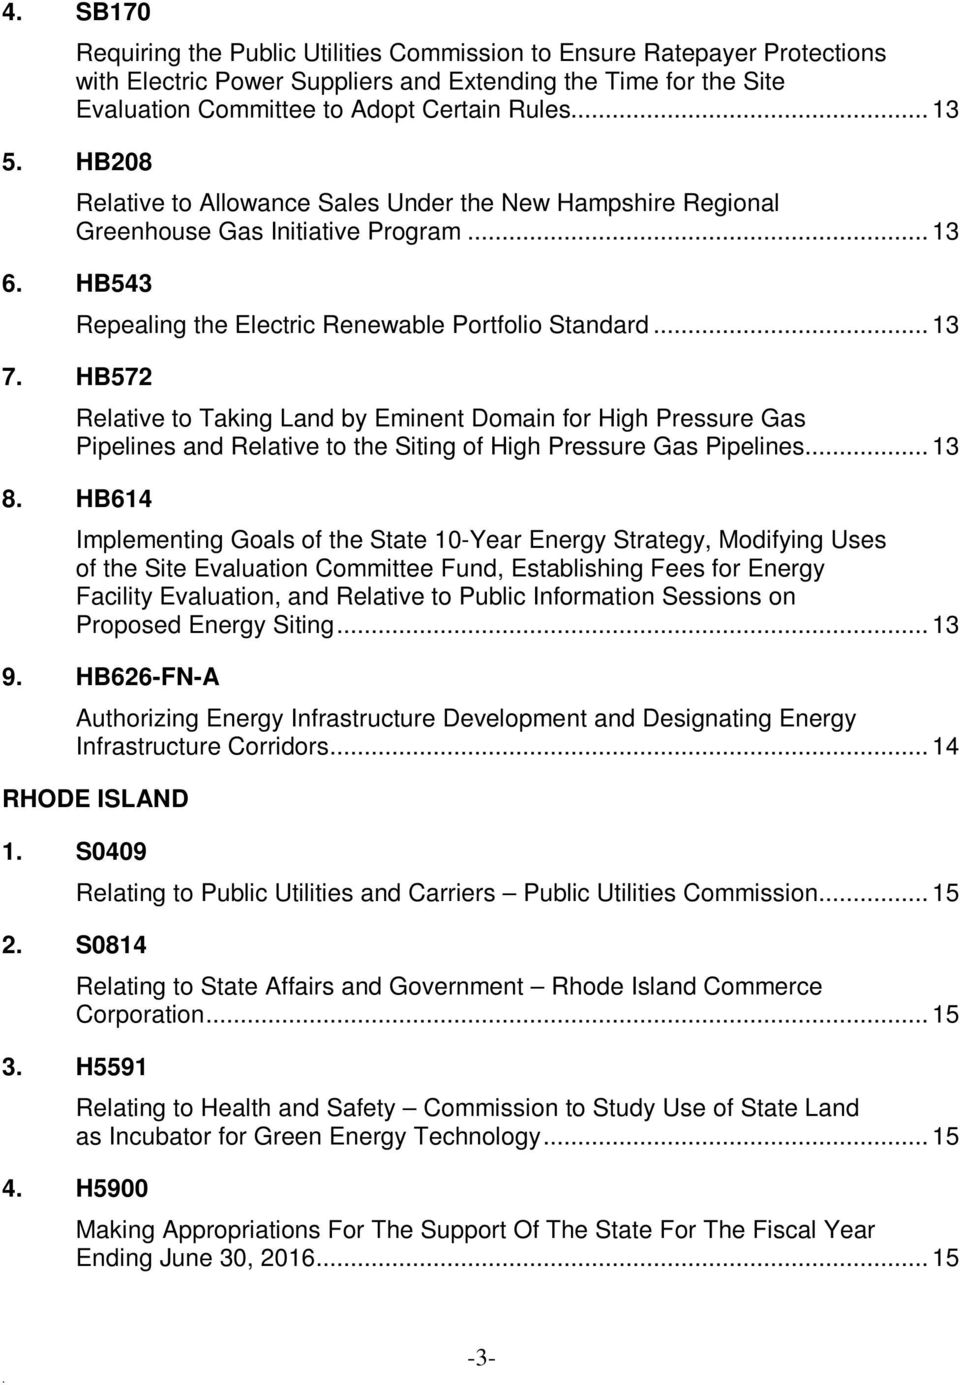 by Eminent Domain for High Pressure Gas Pipelines and Relative to the Siting of High Pressure Gas Pipelines 13 8 HB614 Implementing Goals of the State 10-Year Energy Strategy, Modifying Uses of the